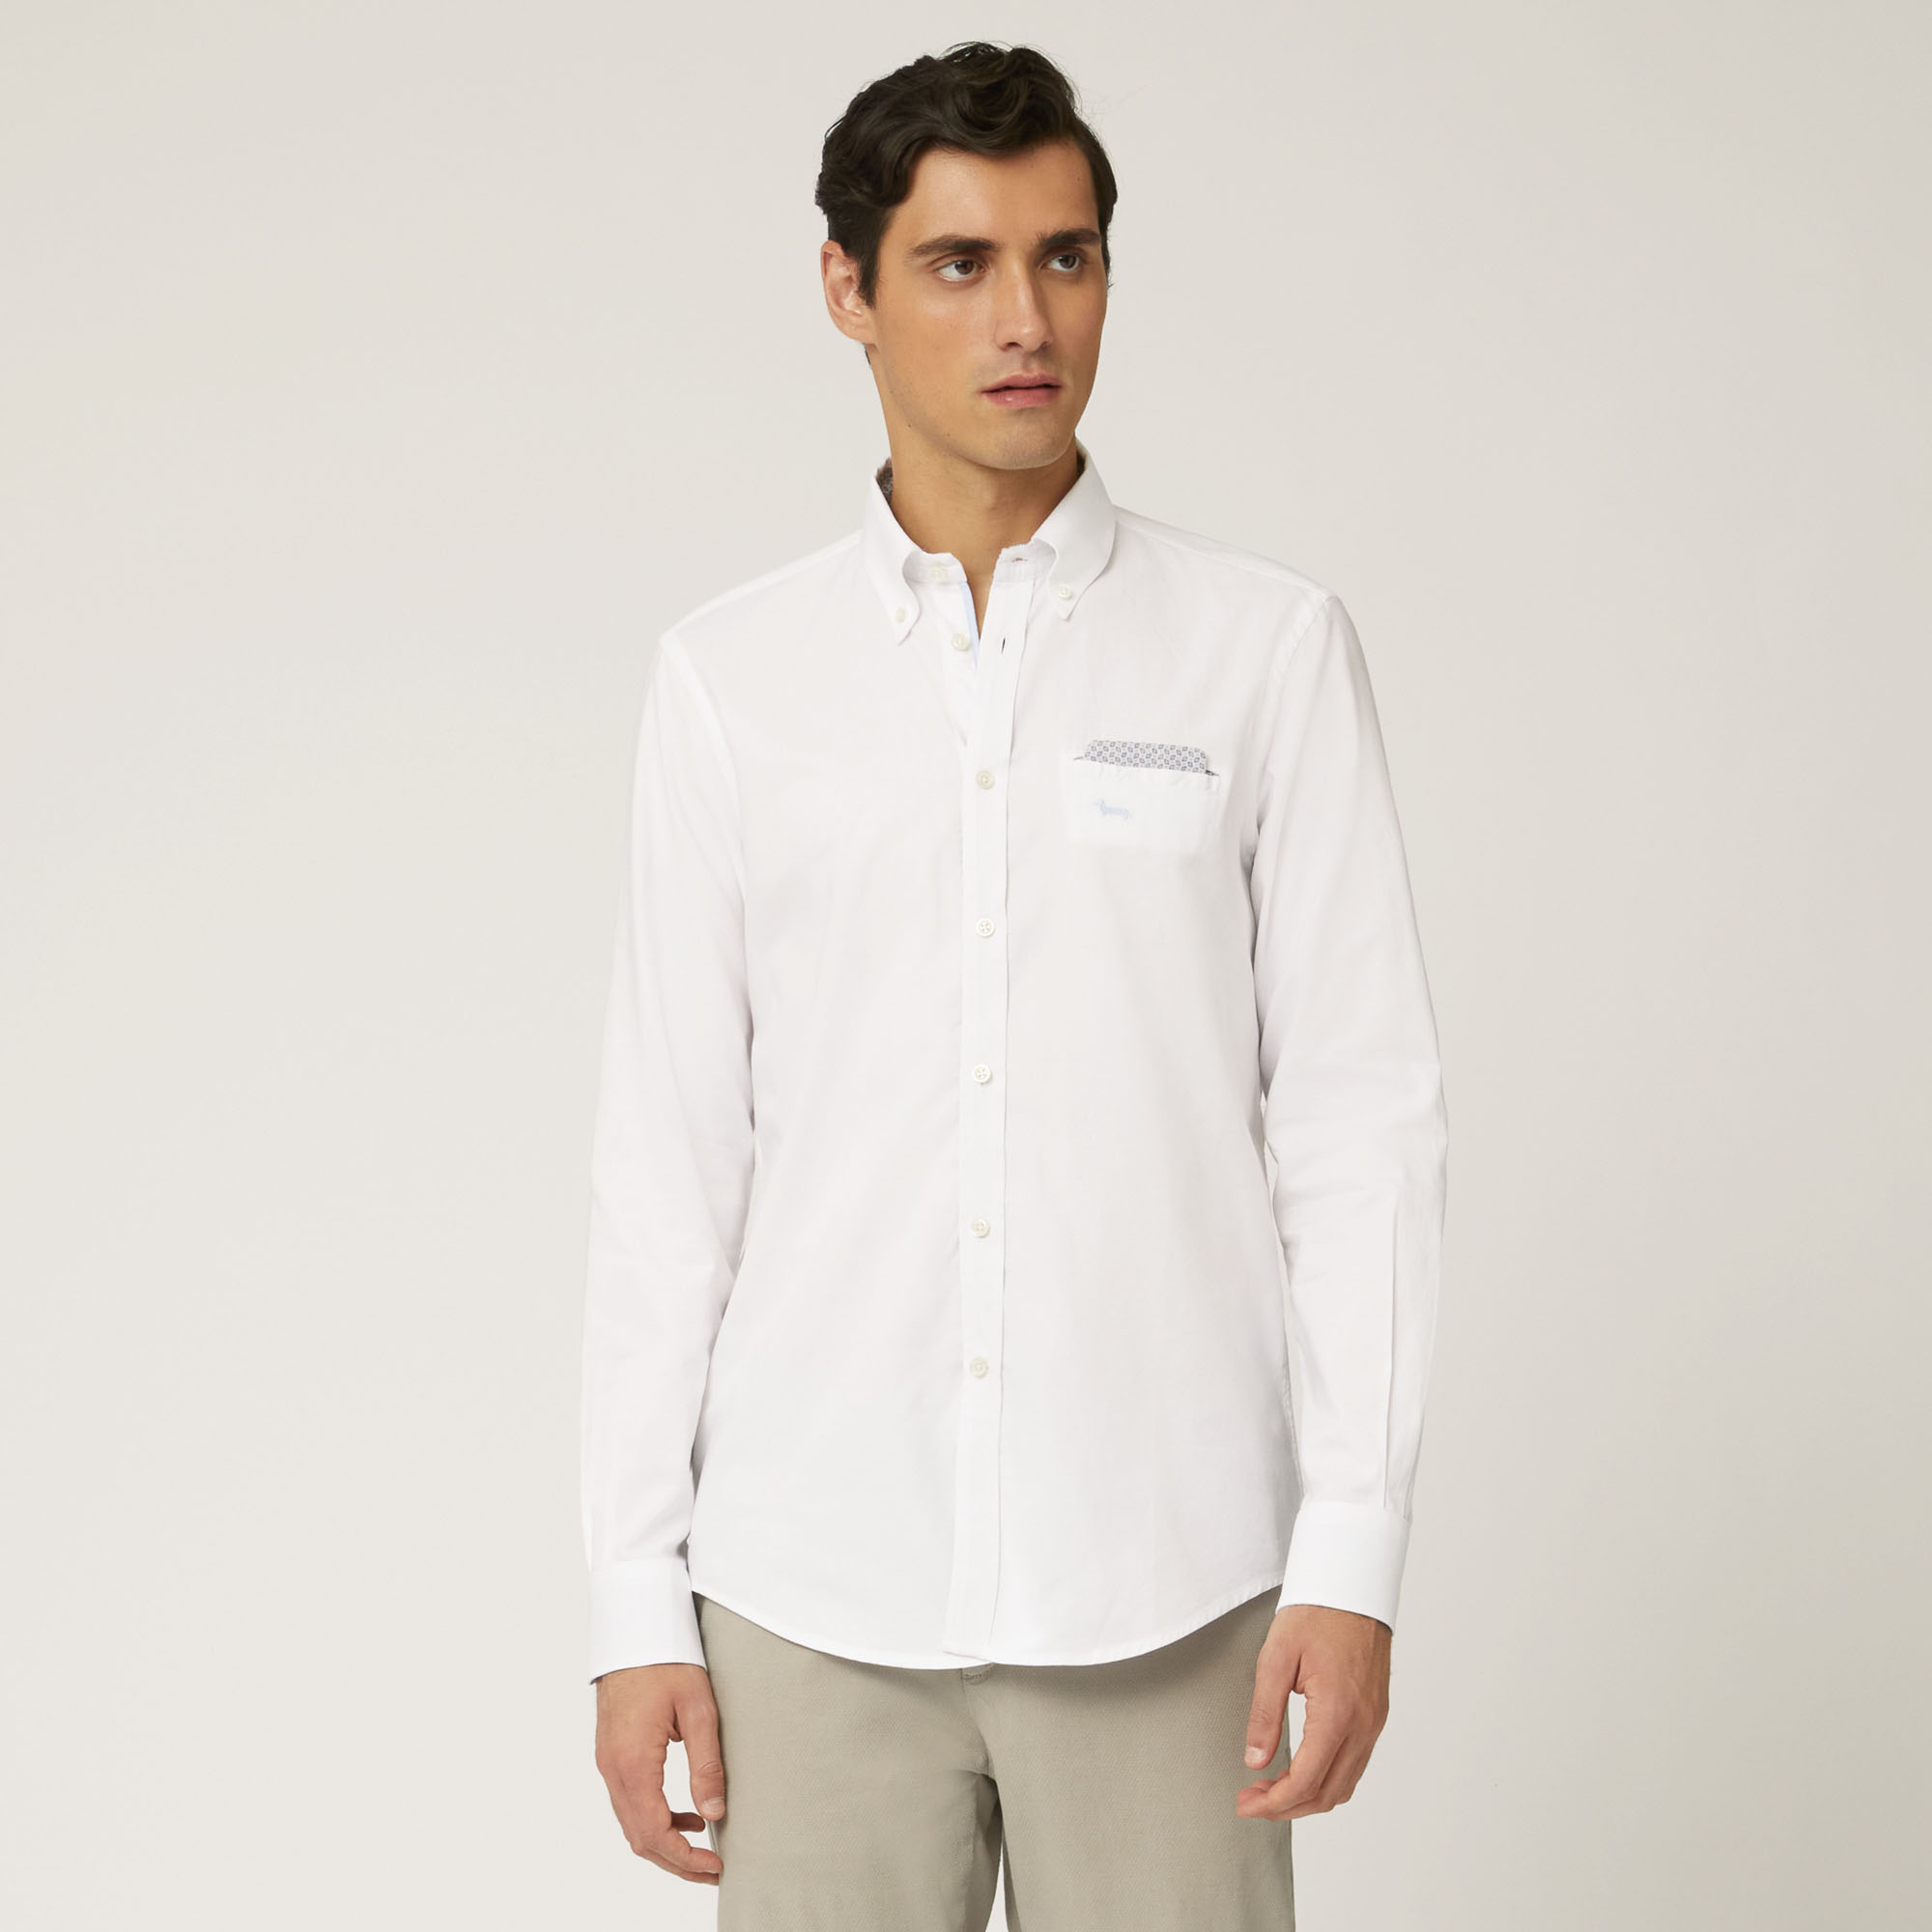 Cotton Shirt With Small Welt Pocket